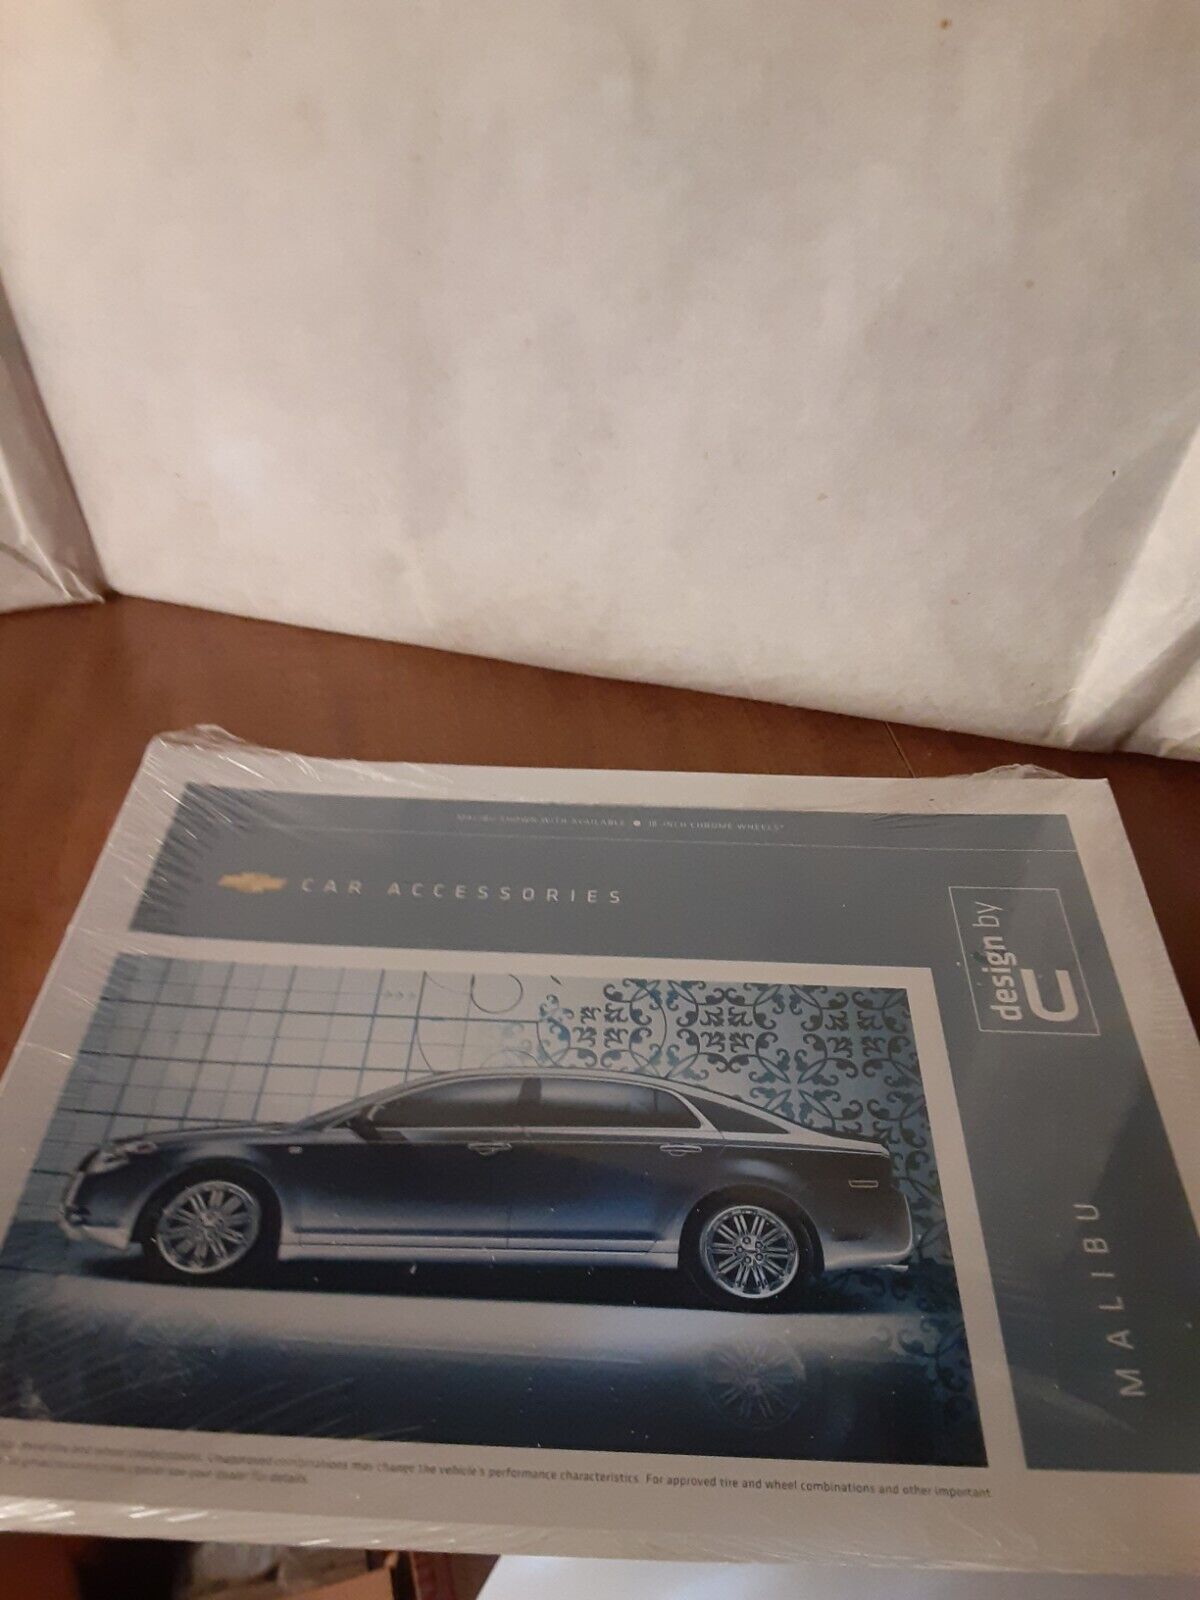 Chevy Malibu Car Accessories Dealer Brochures Sealed Package Never Opened